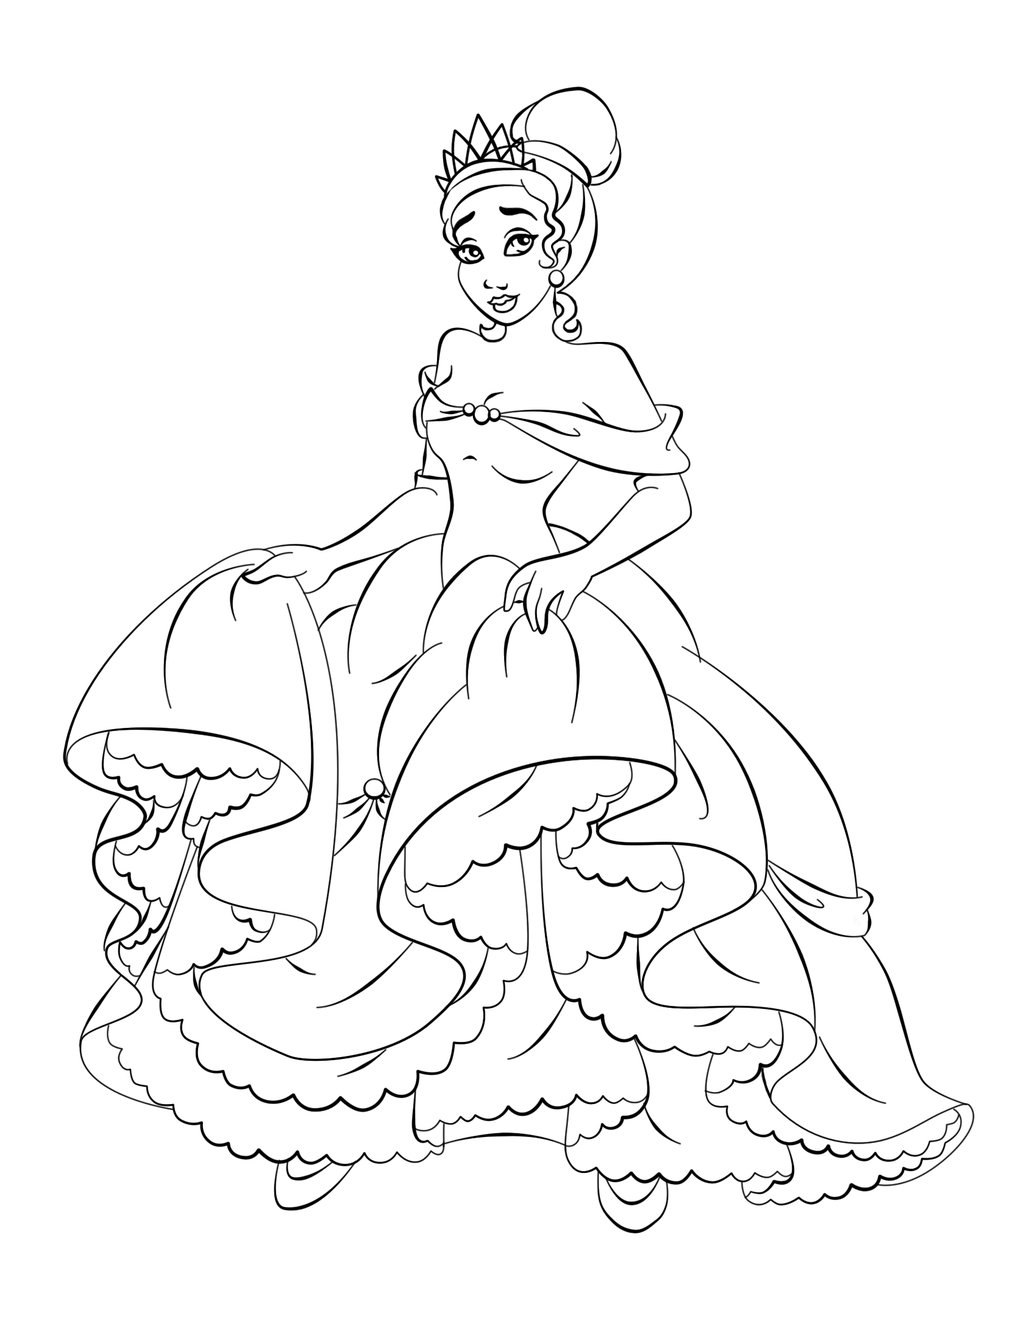 Printable Princess Coloring Pages Free Princess Coloring Pages Best Coloring Pages For Kids